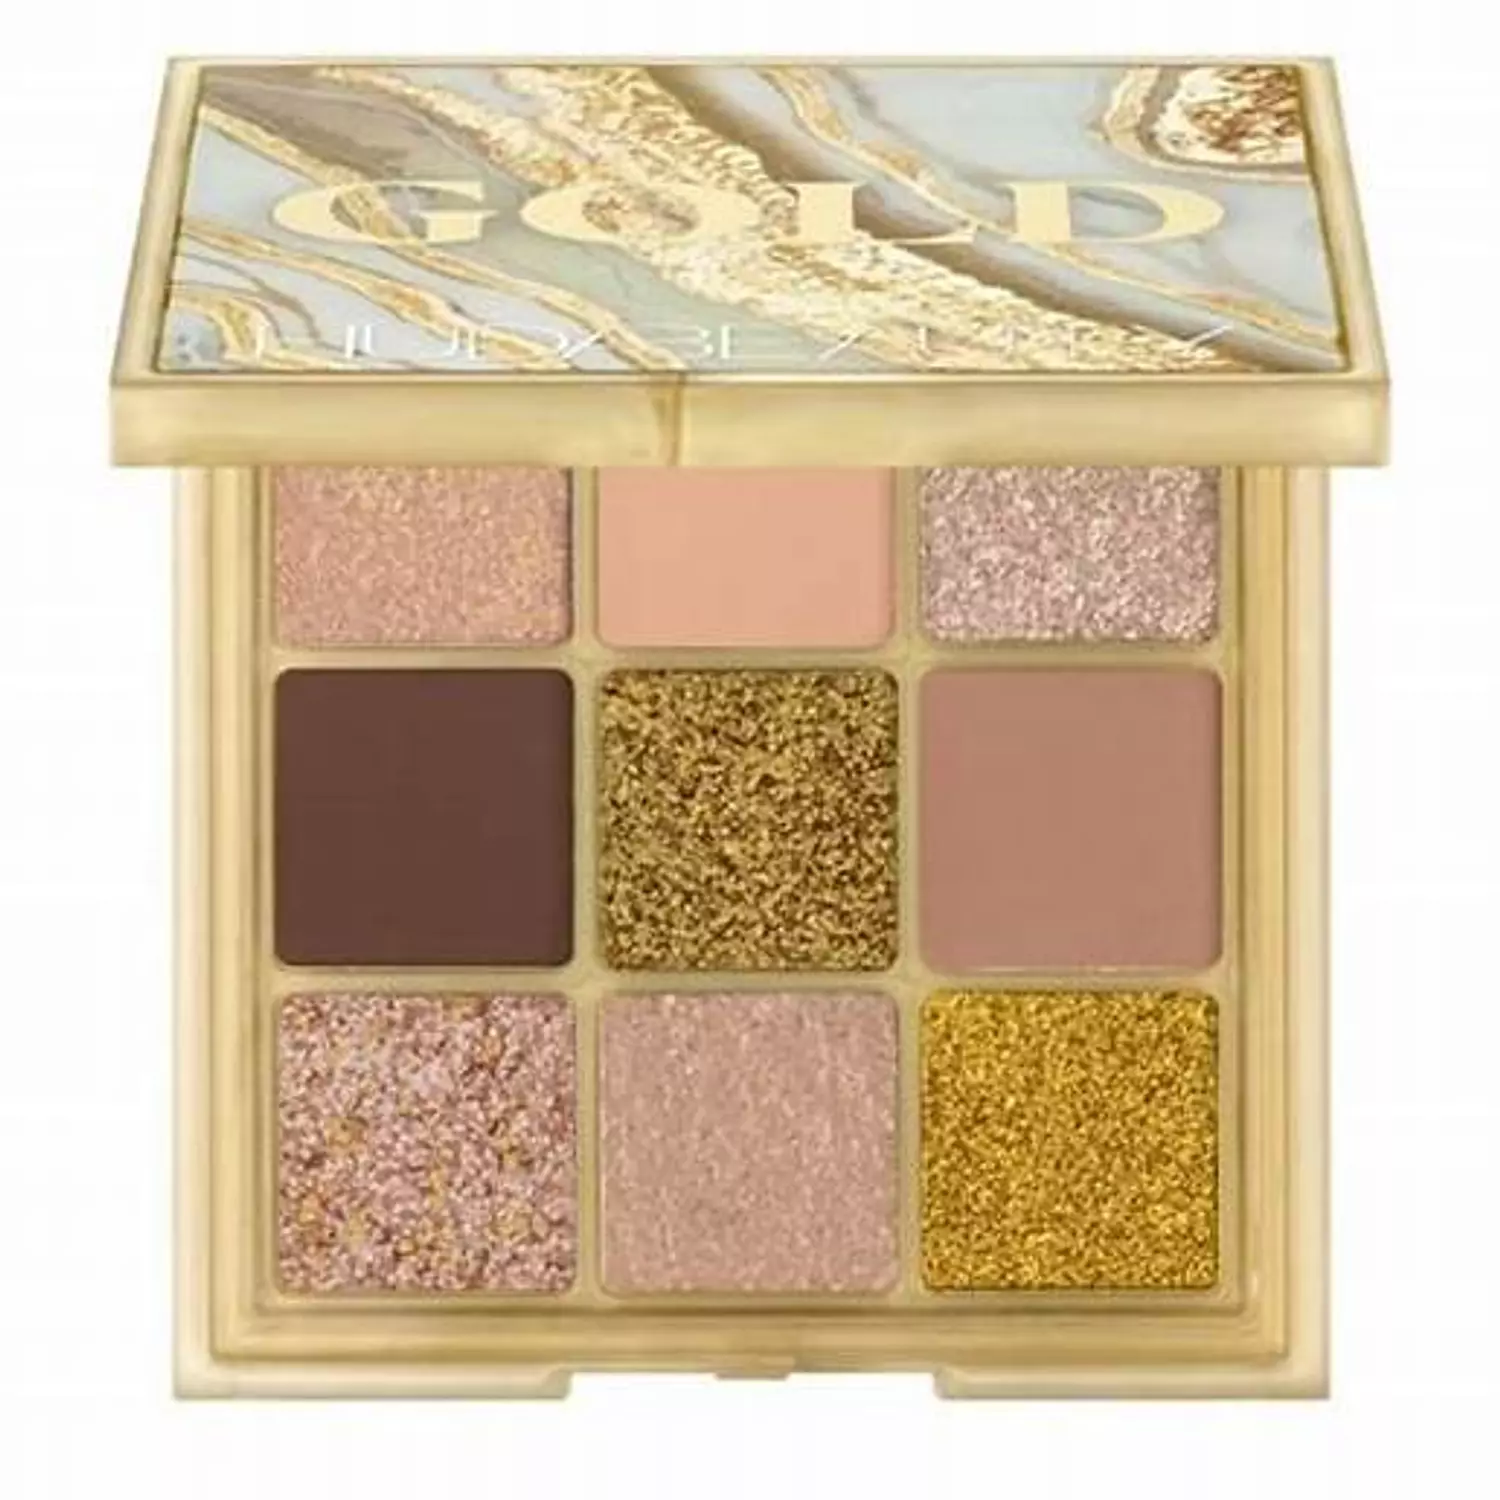 GOLD OBSESSIONS  EYESHADOW PALETTE | HUDA BEAUTY hover image